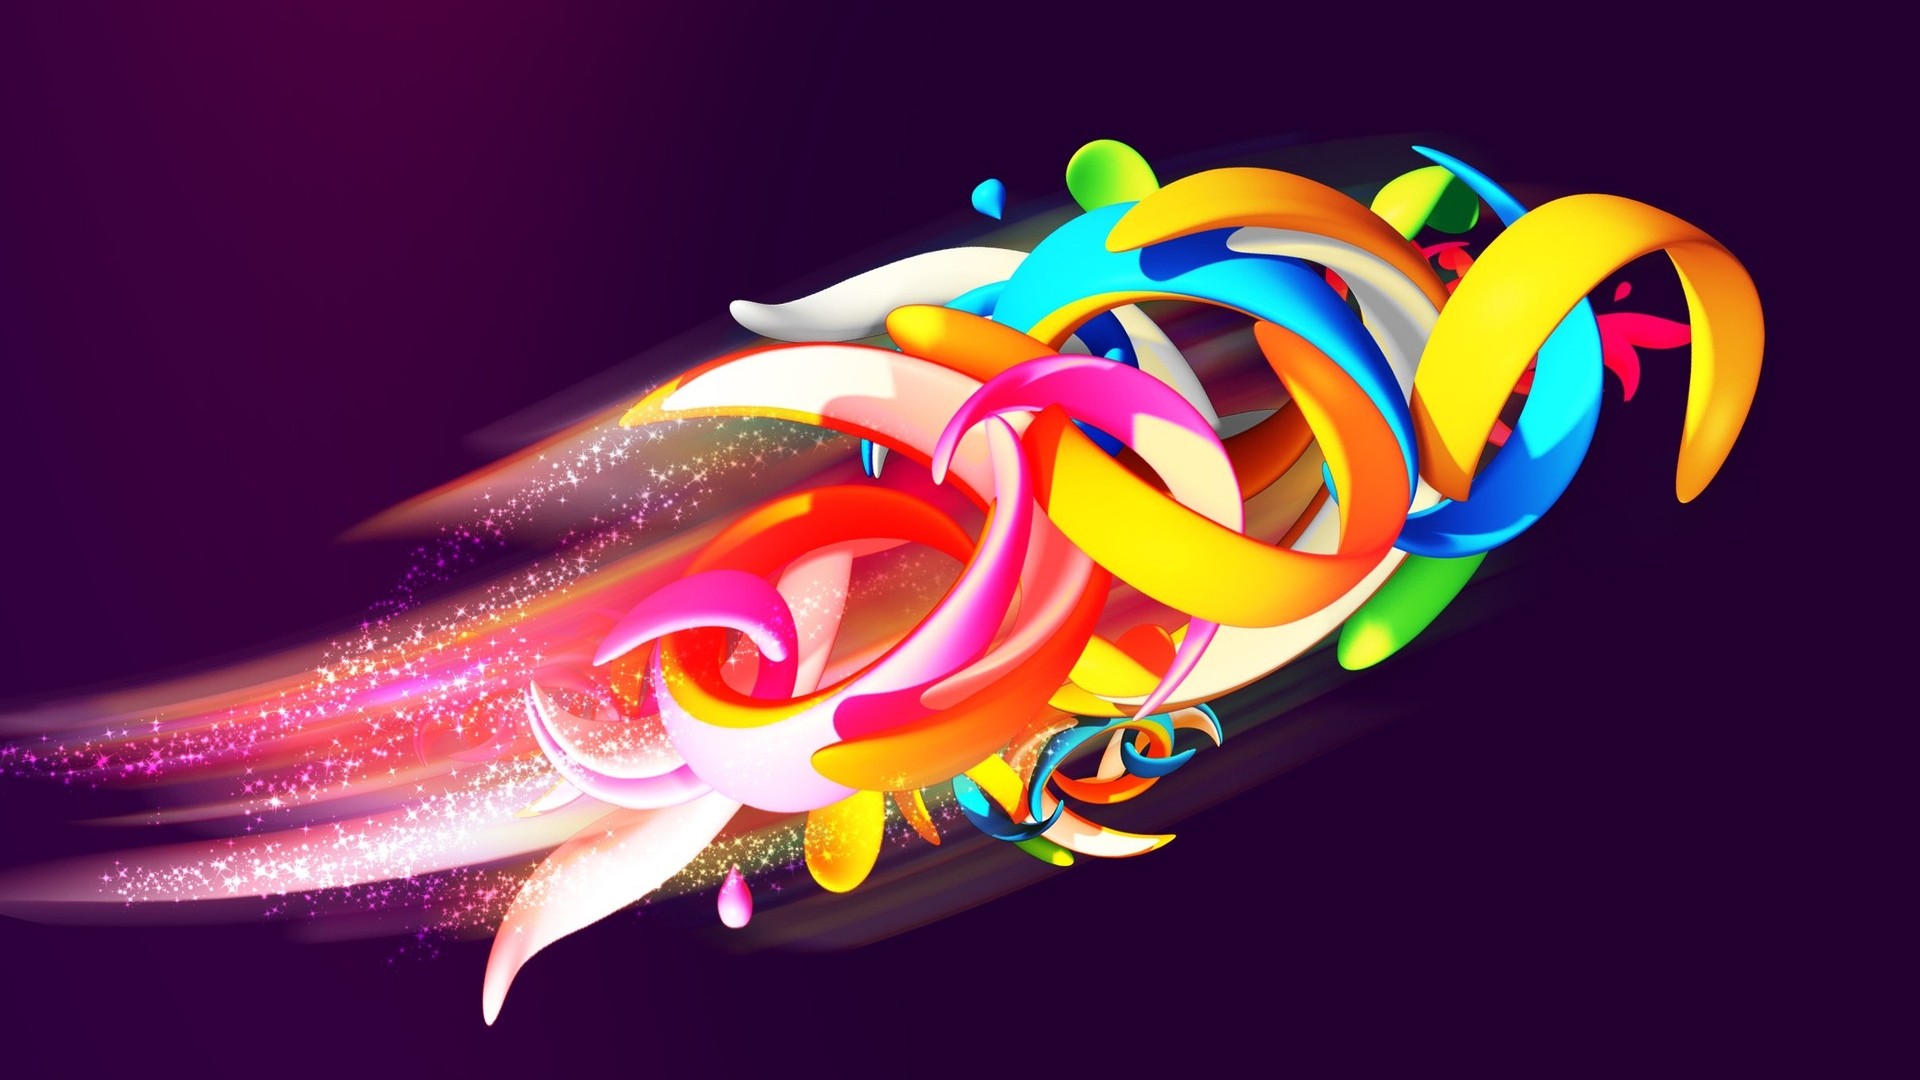 abstract wallpaper desktop shapes colorful 1920x1080